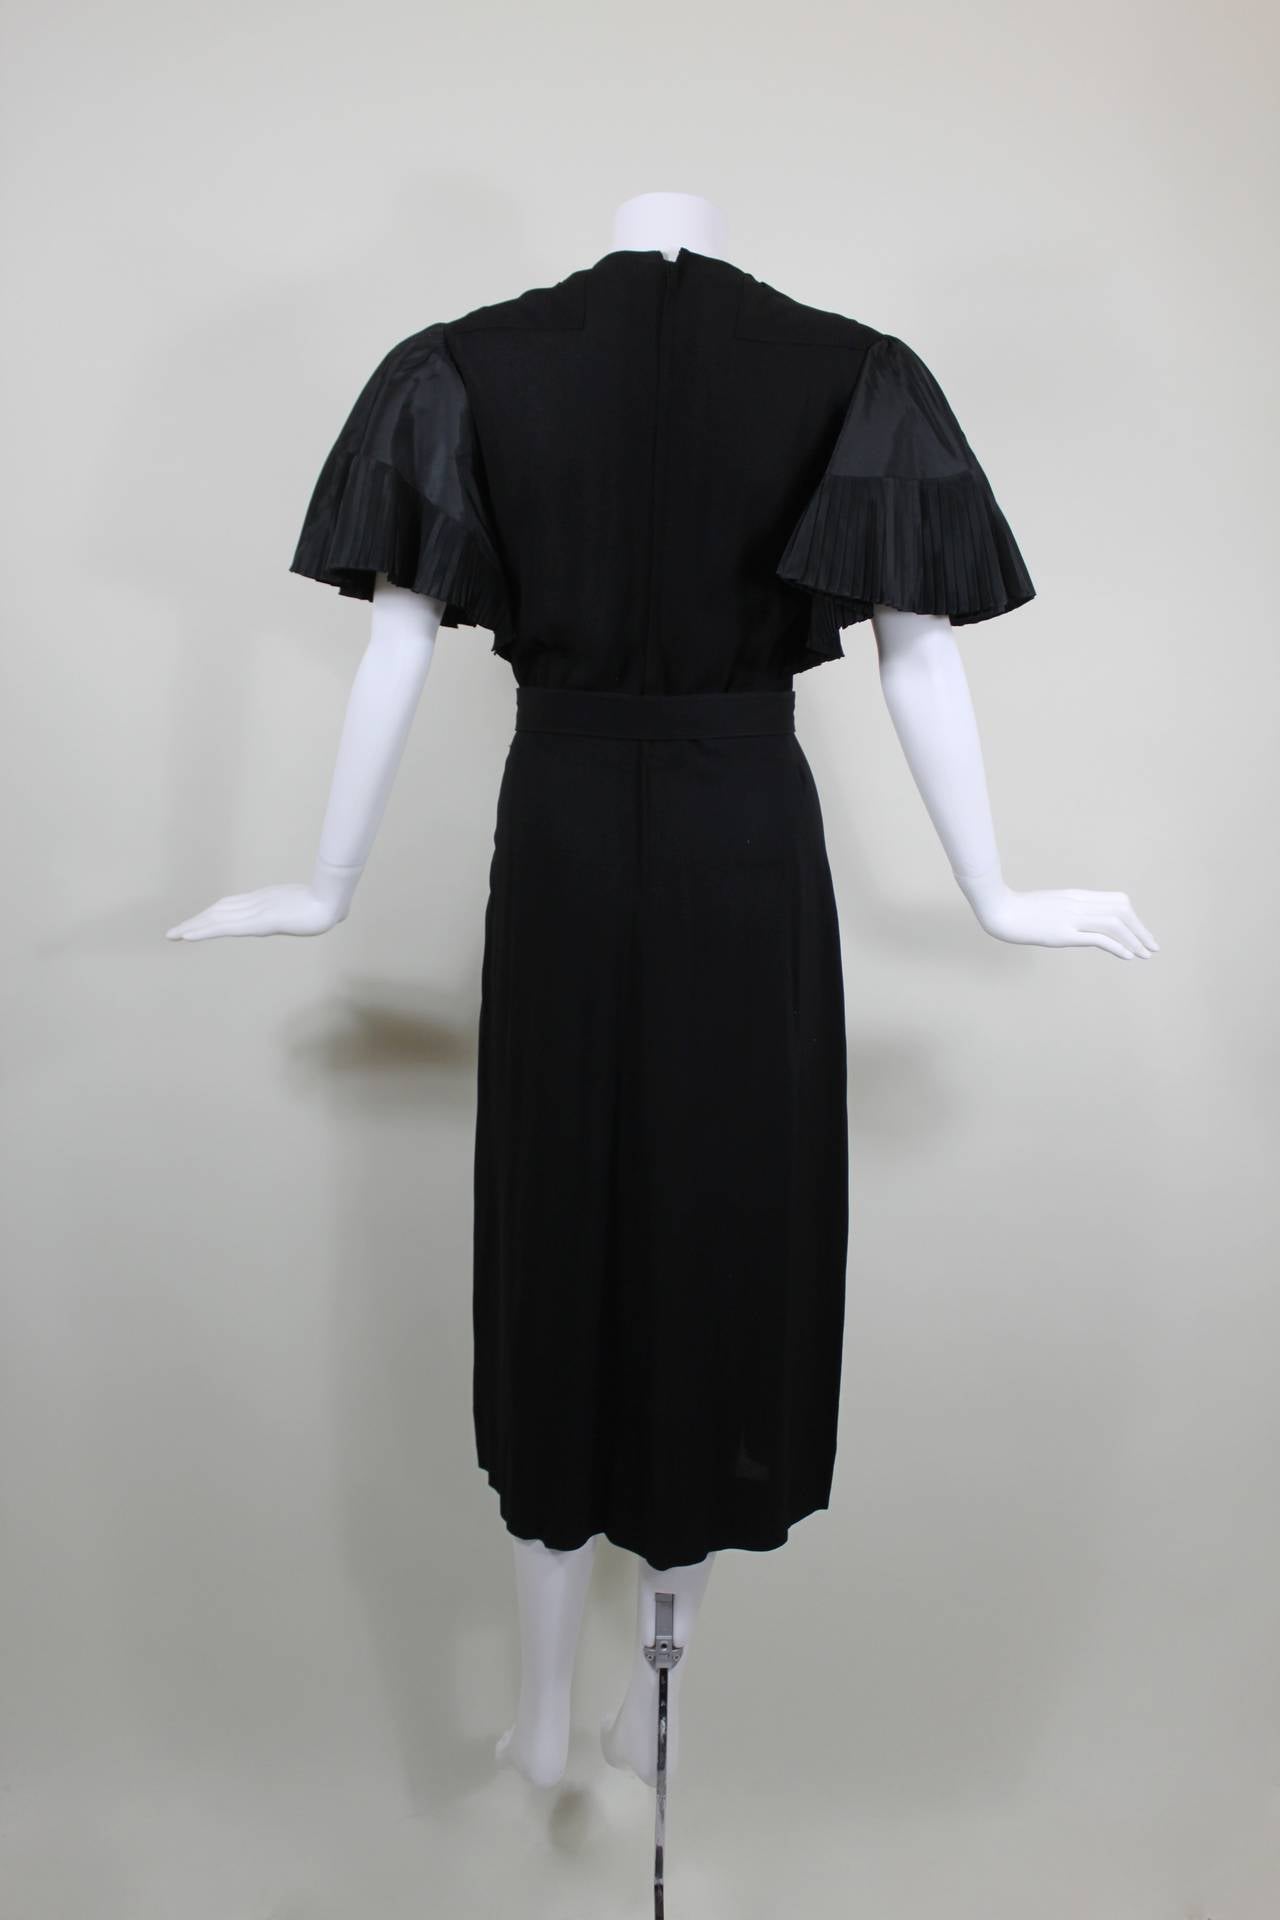 This fabulous cocktail dress from iconic Hollywood designer Adrian is done in black crepe and features gorgeous pleated taffeta statement sleeves.

Measurements--
Bust: 36 inches
Waist: 27 inches
Hip: up to 40 inches
Length, Shoulder to Shoulder: 18